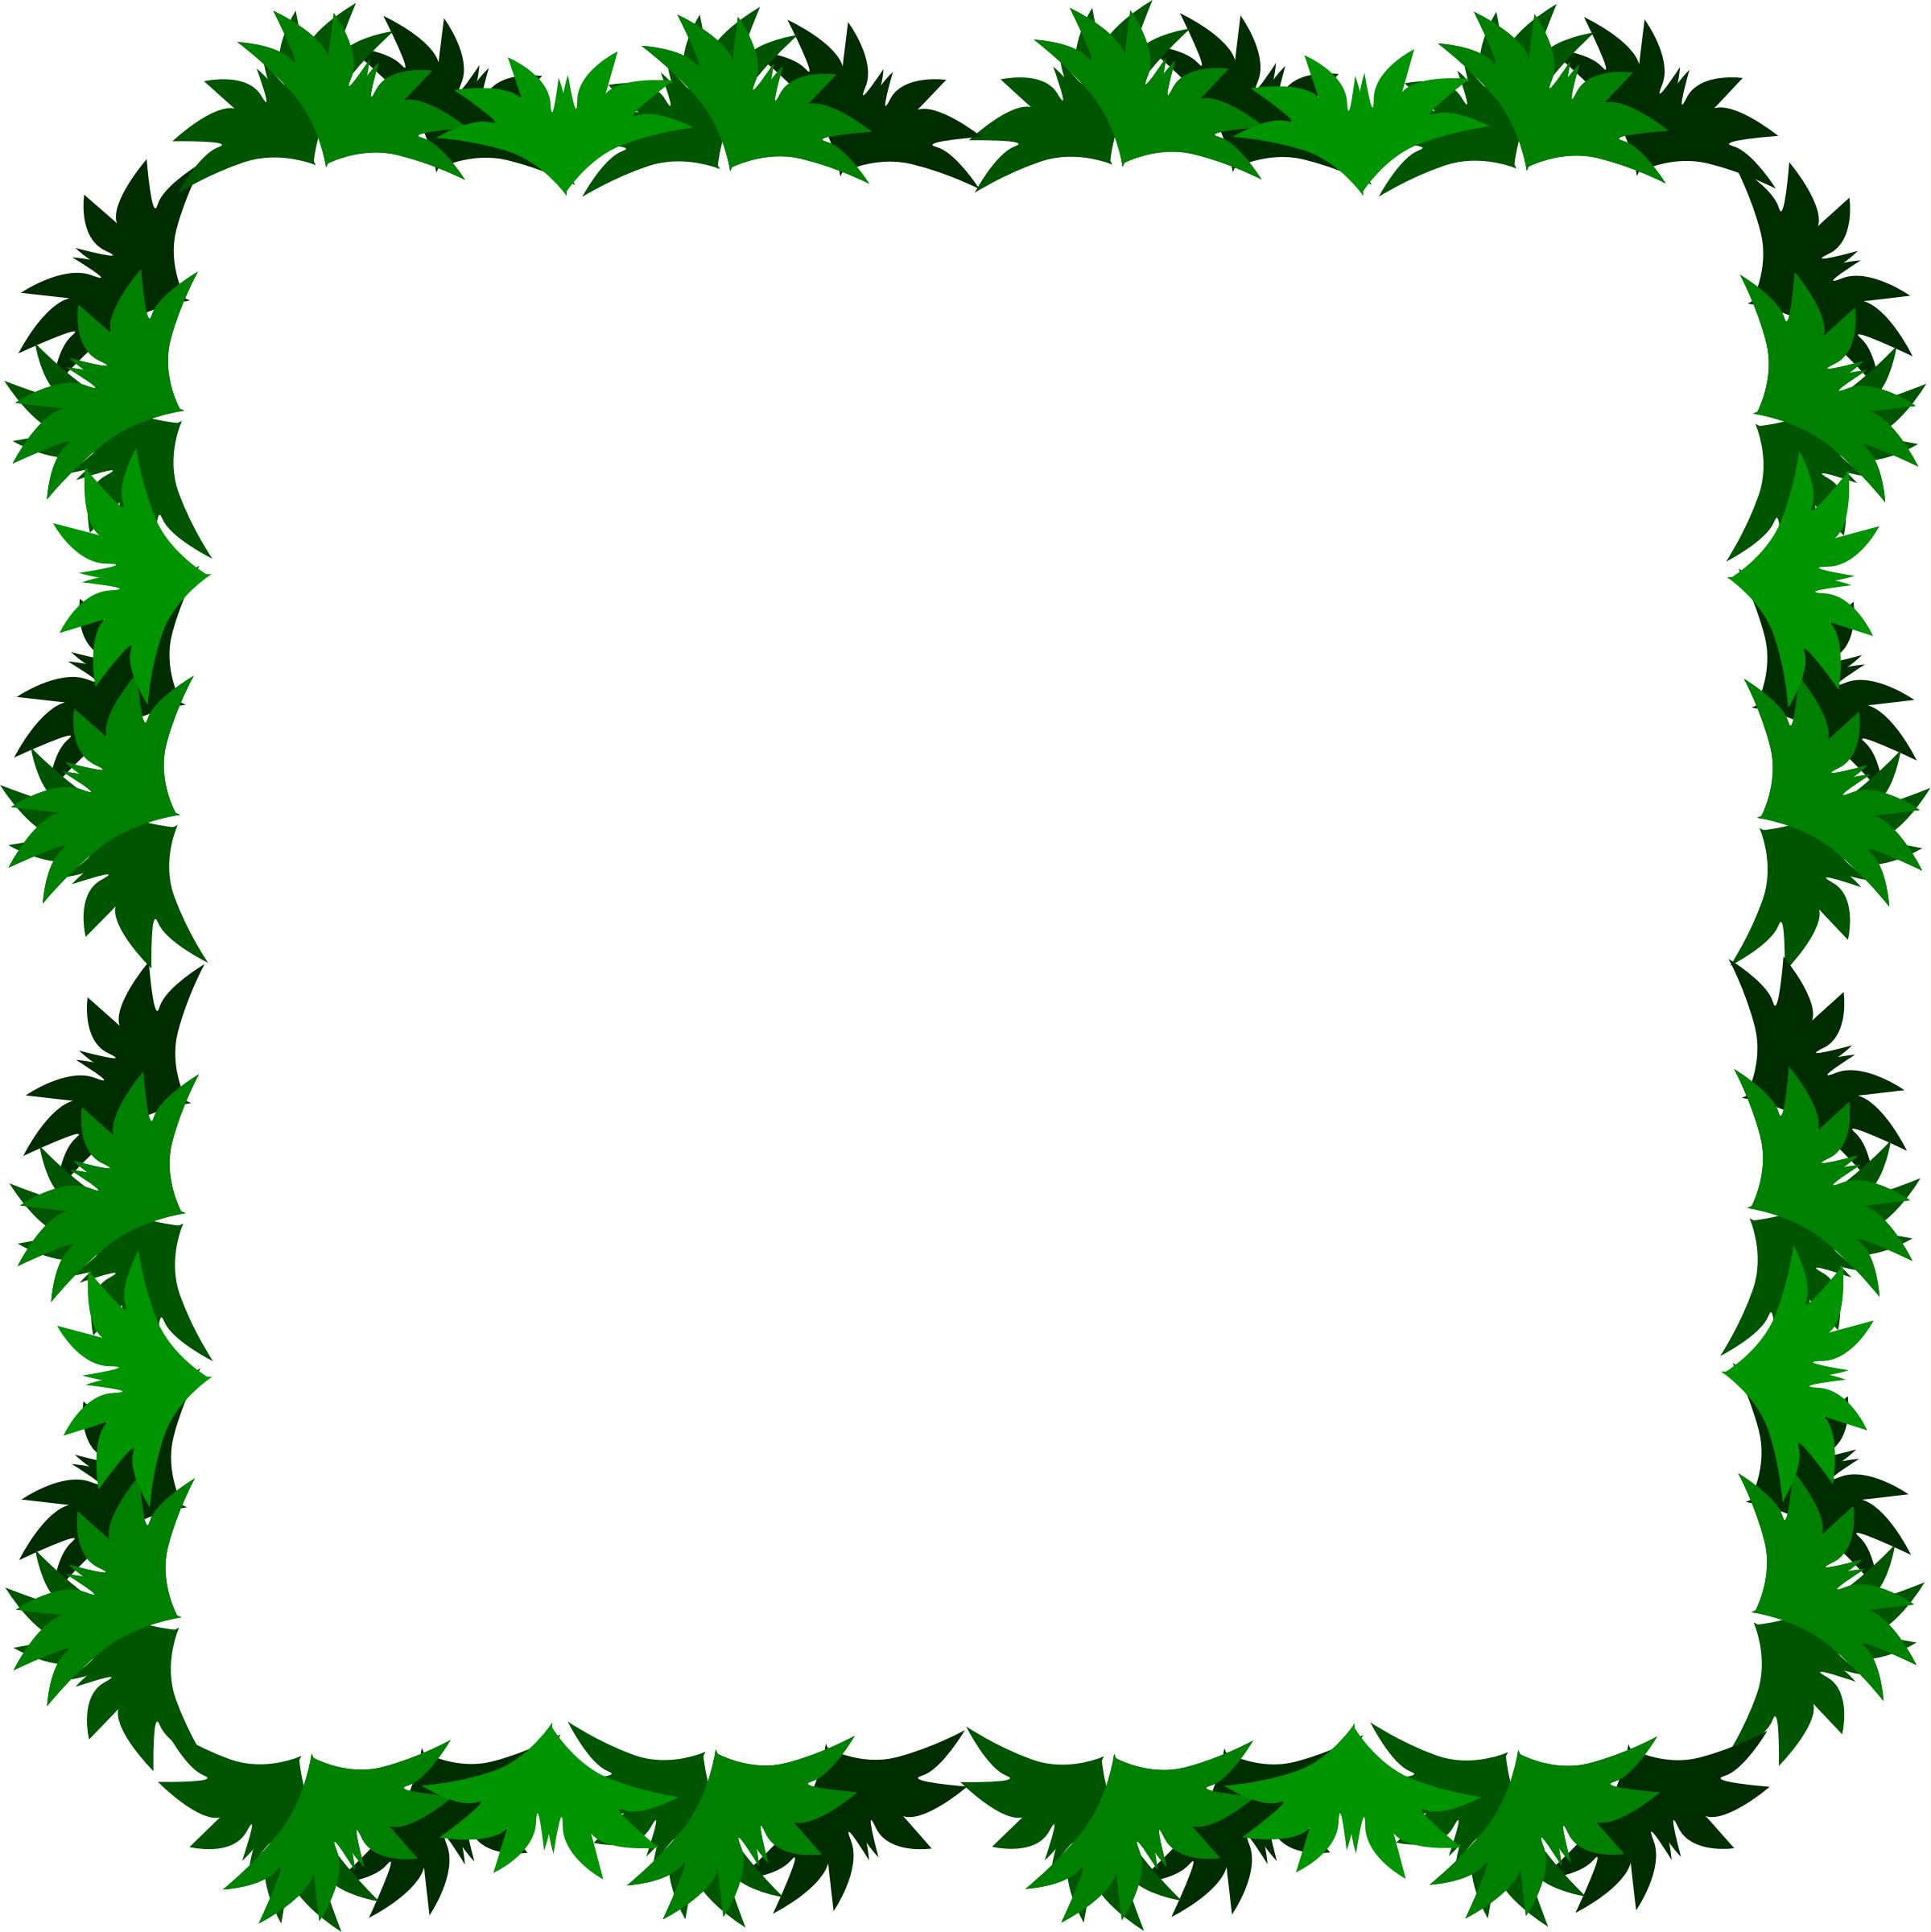 Four Sided Border made from Grass png